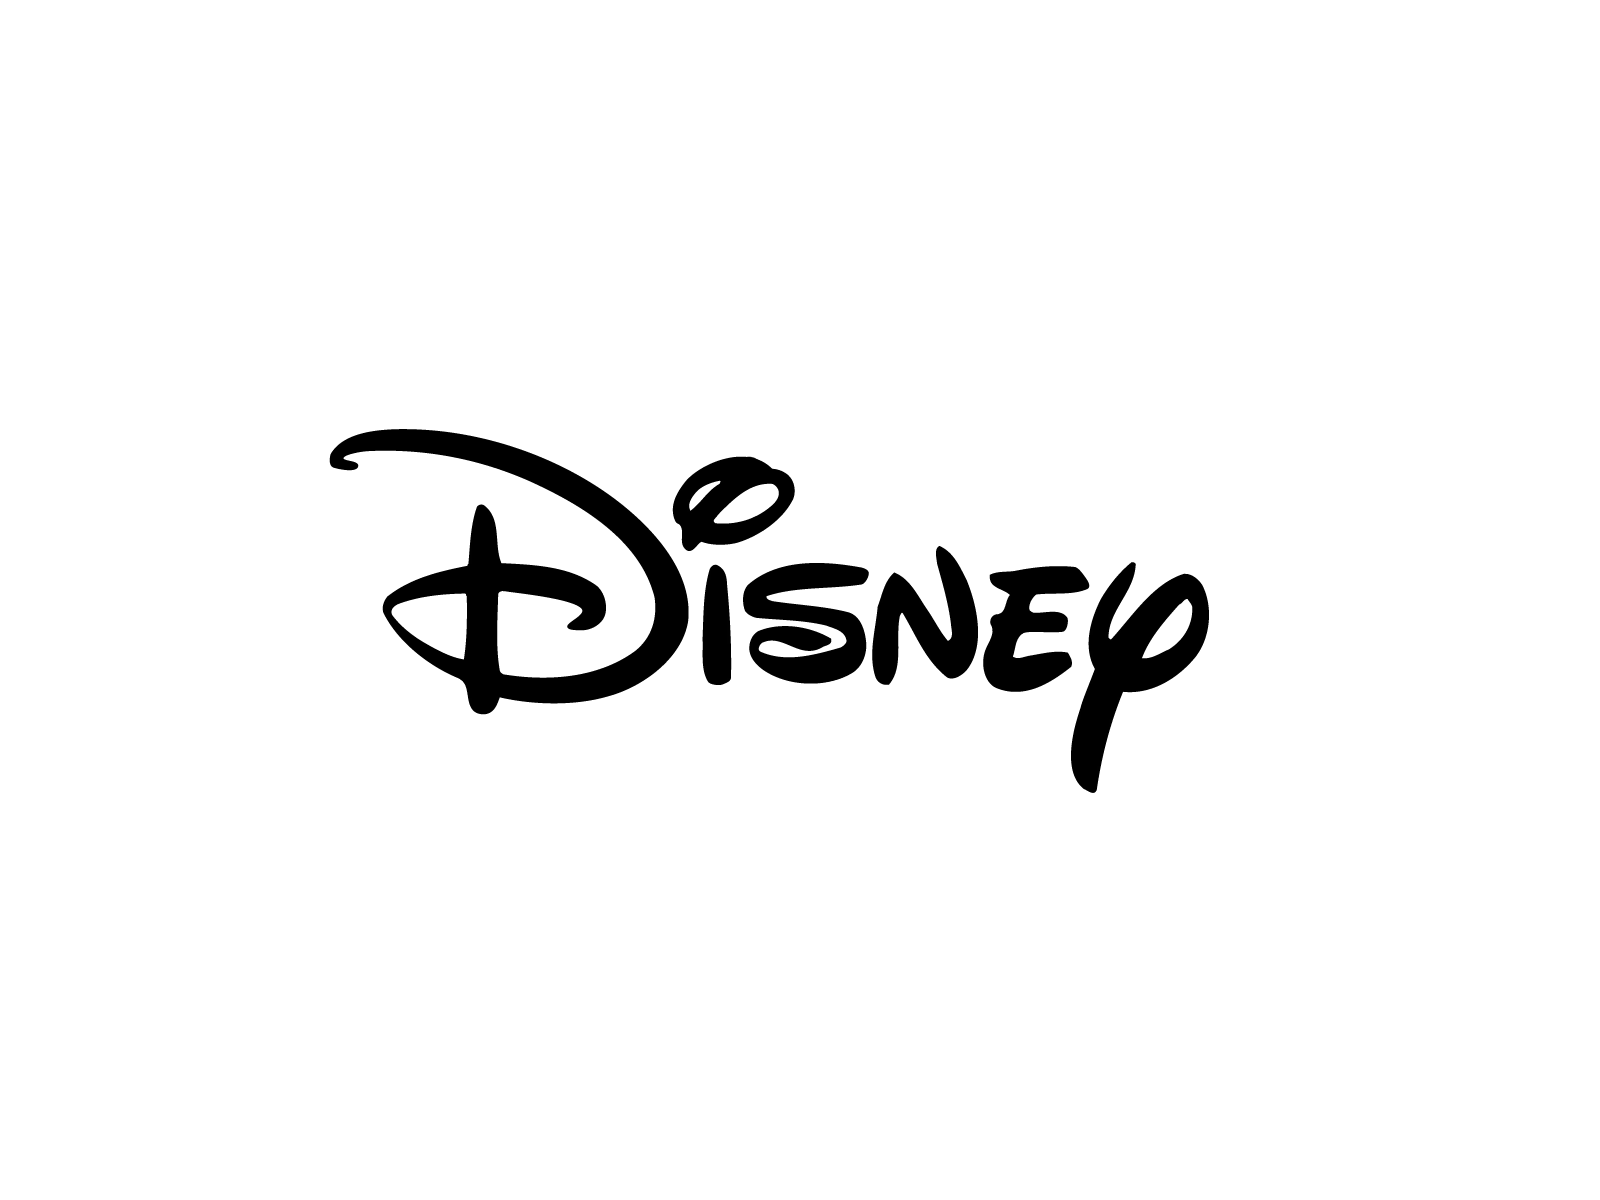 Disney Logo Animation by Quang Nguyen on Dribbble